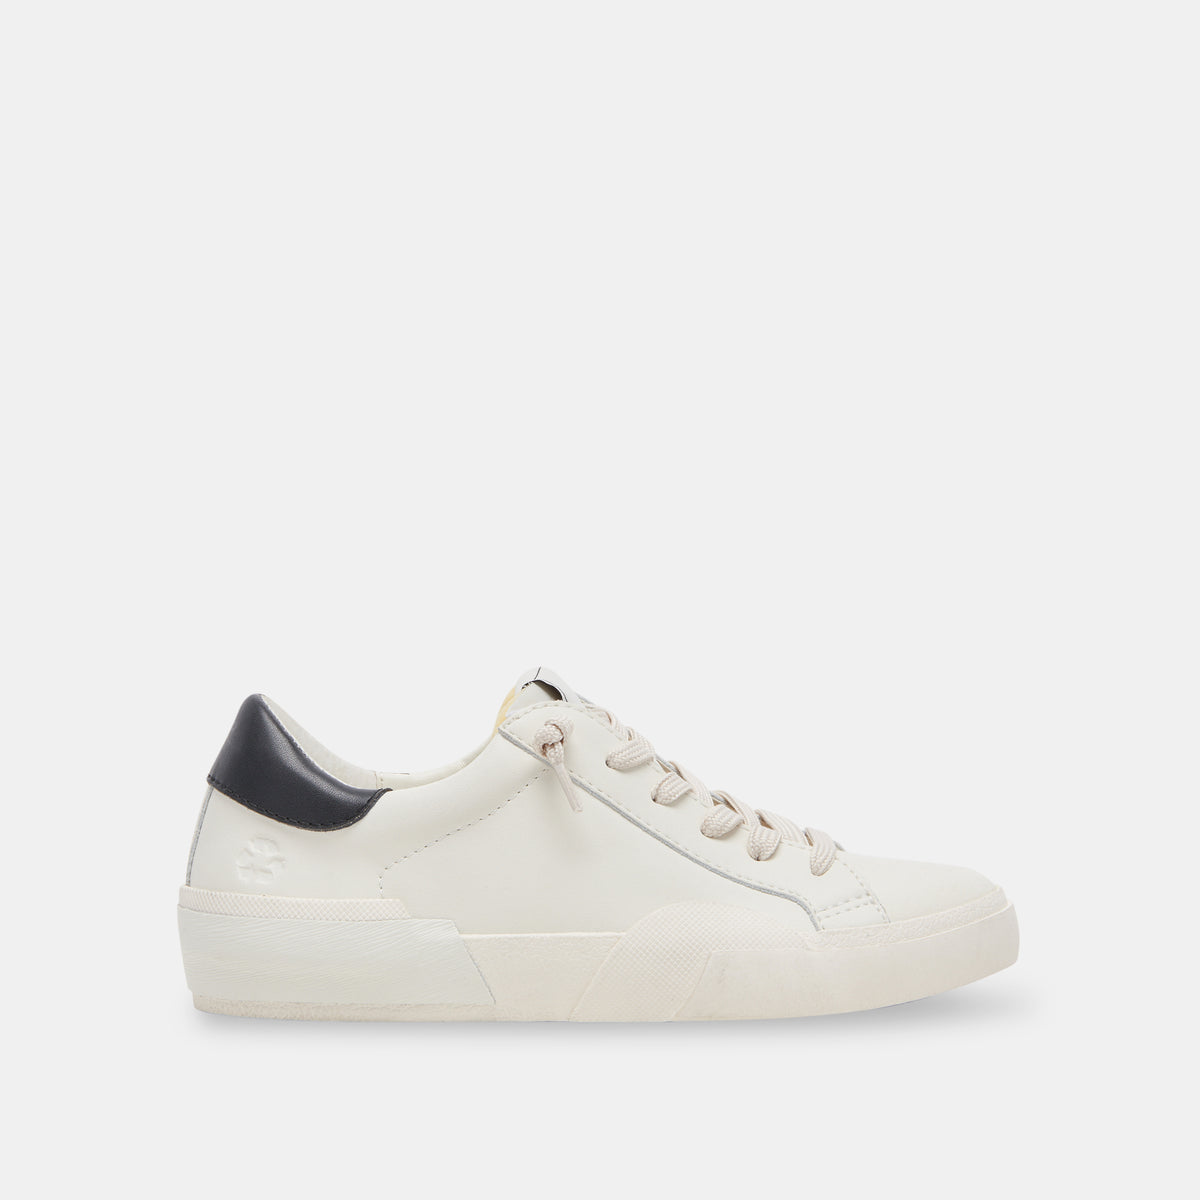 ZINA FOAM 360 SNEAKERS WHITE BLACK RECYCLED LEATHER – Dolce Vita